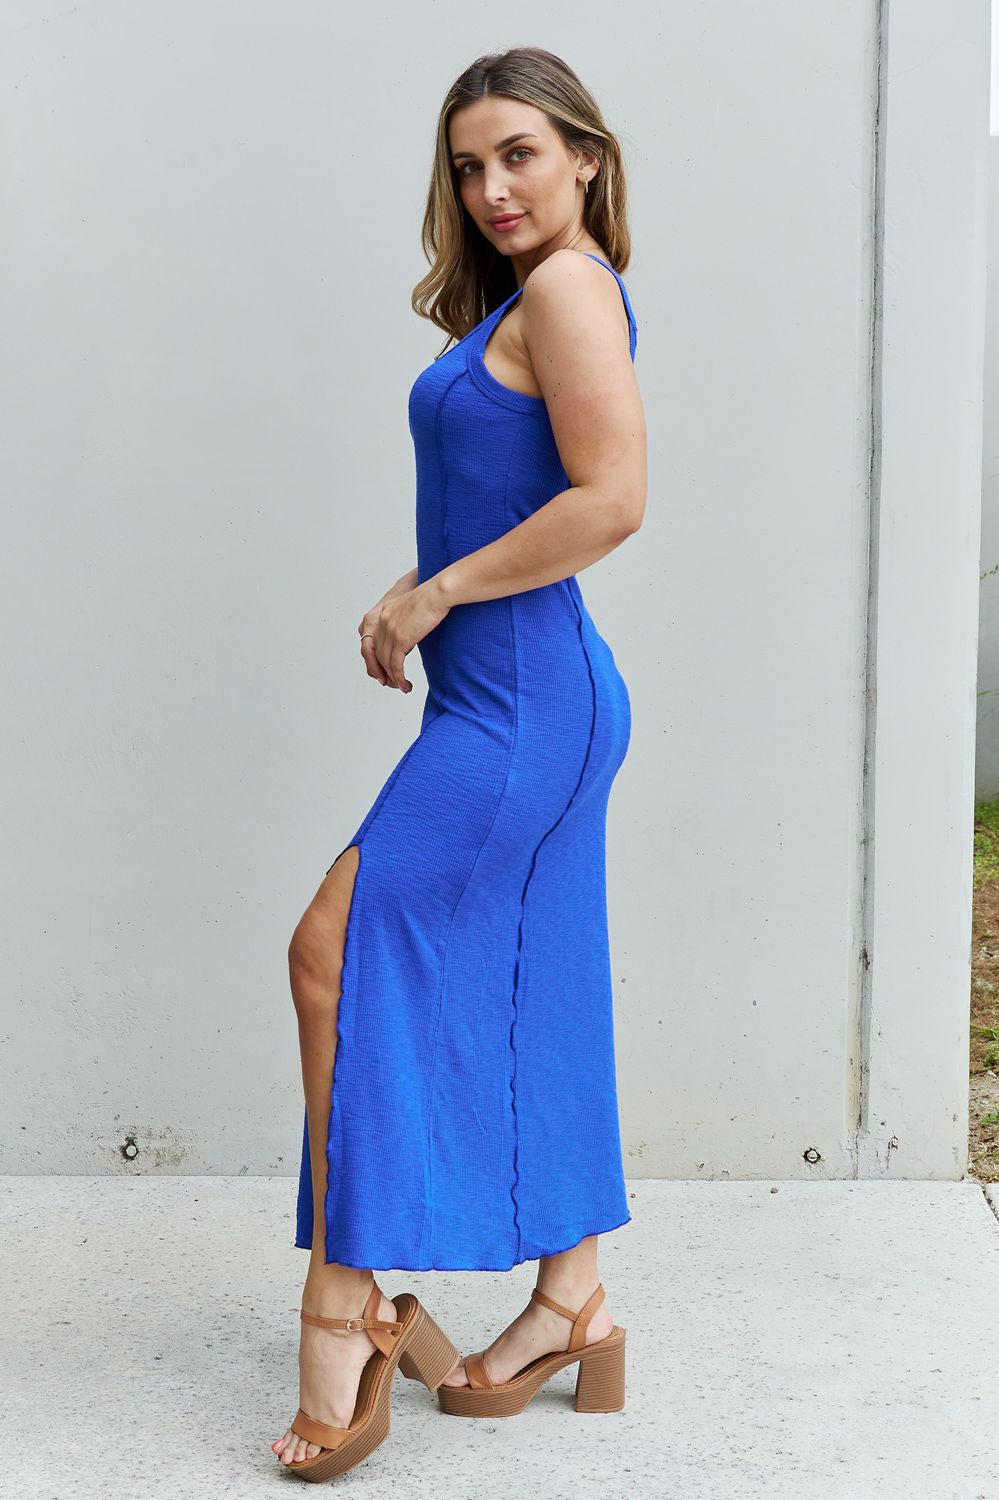 Culture Code Look At Me Notch Neck Maxi Dress with Slit in Cobalt Blue Culture Code